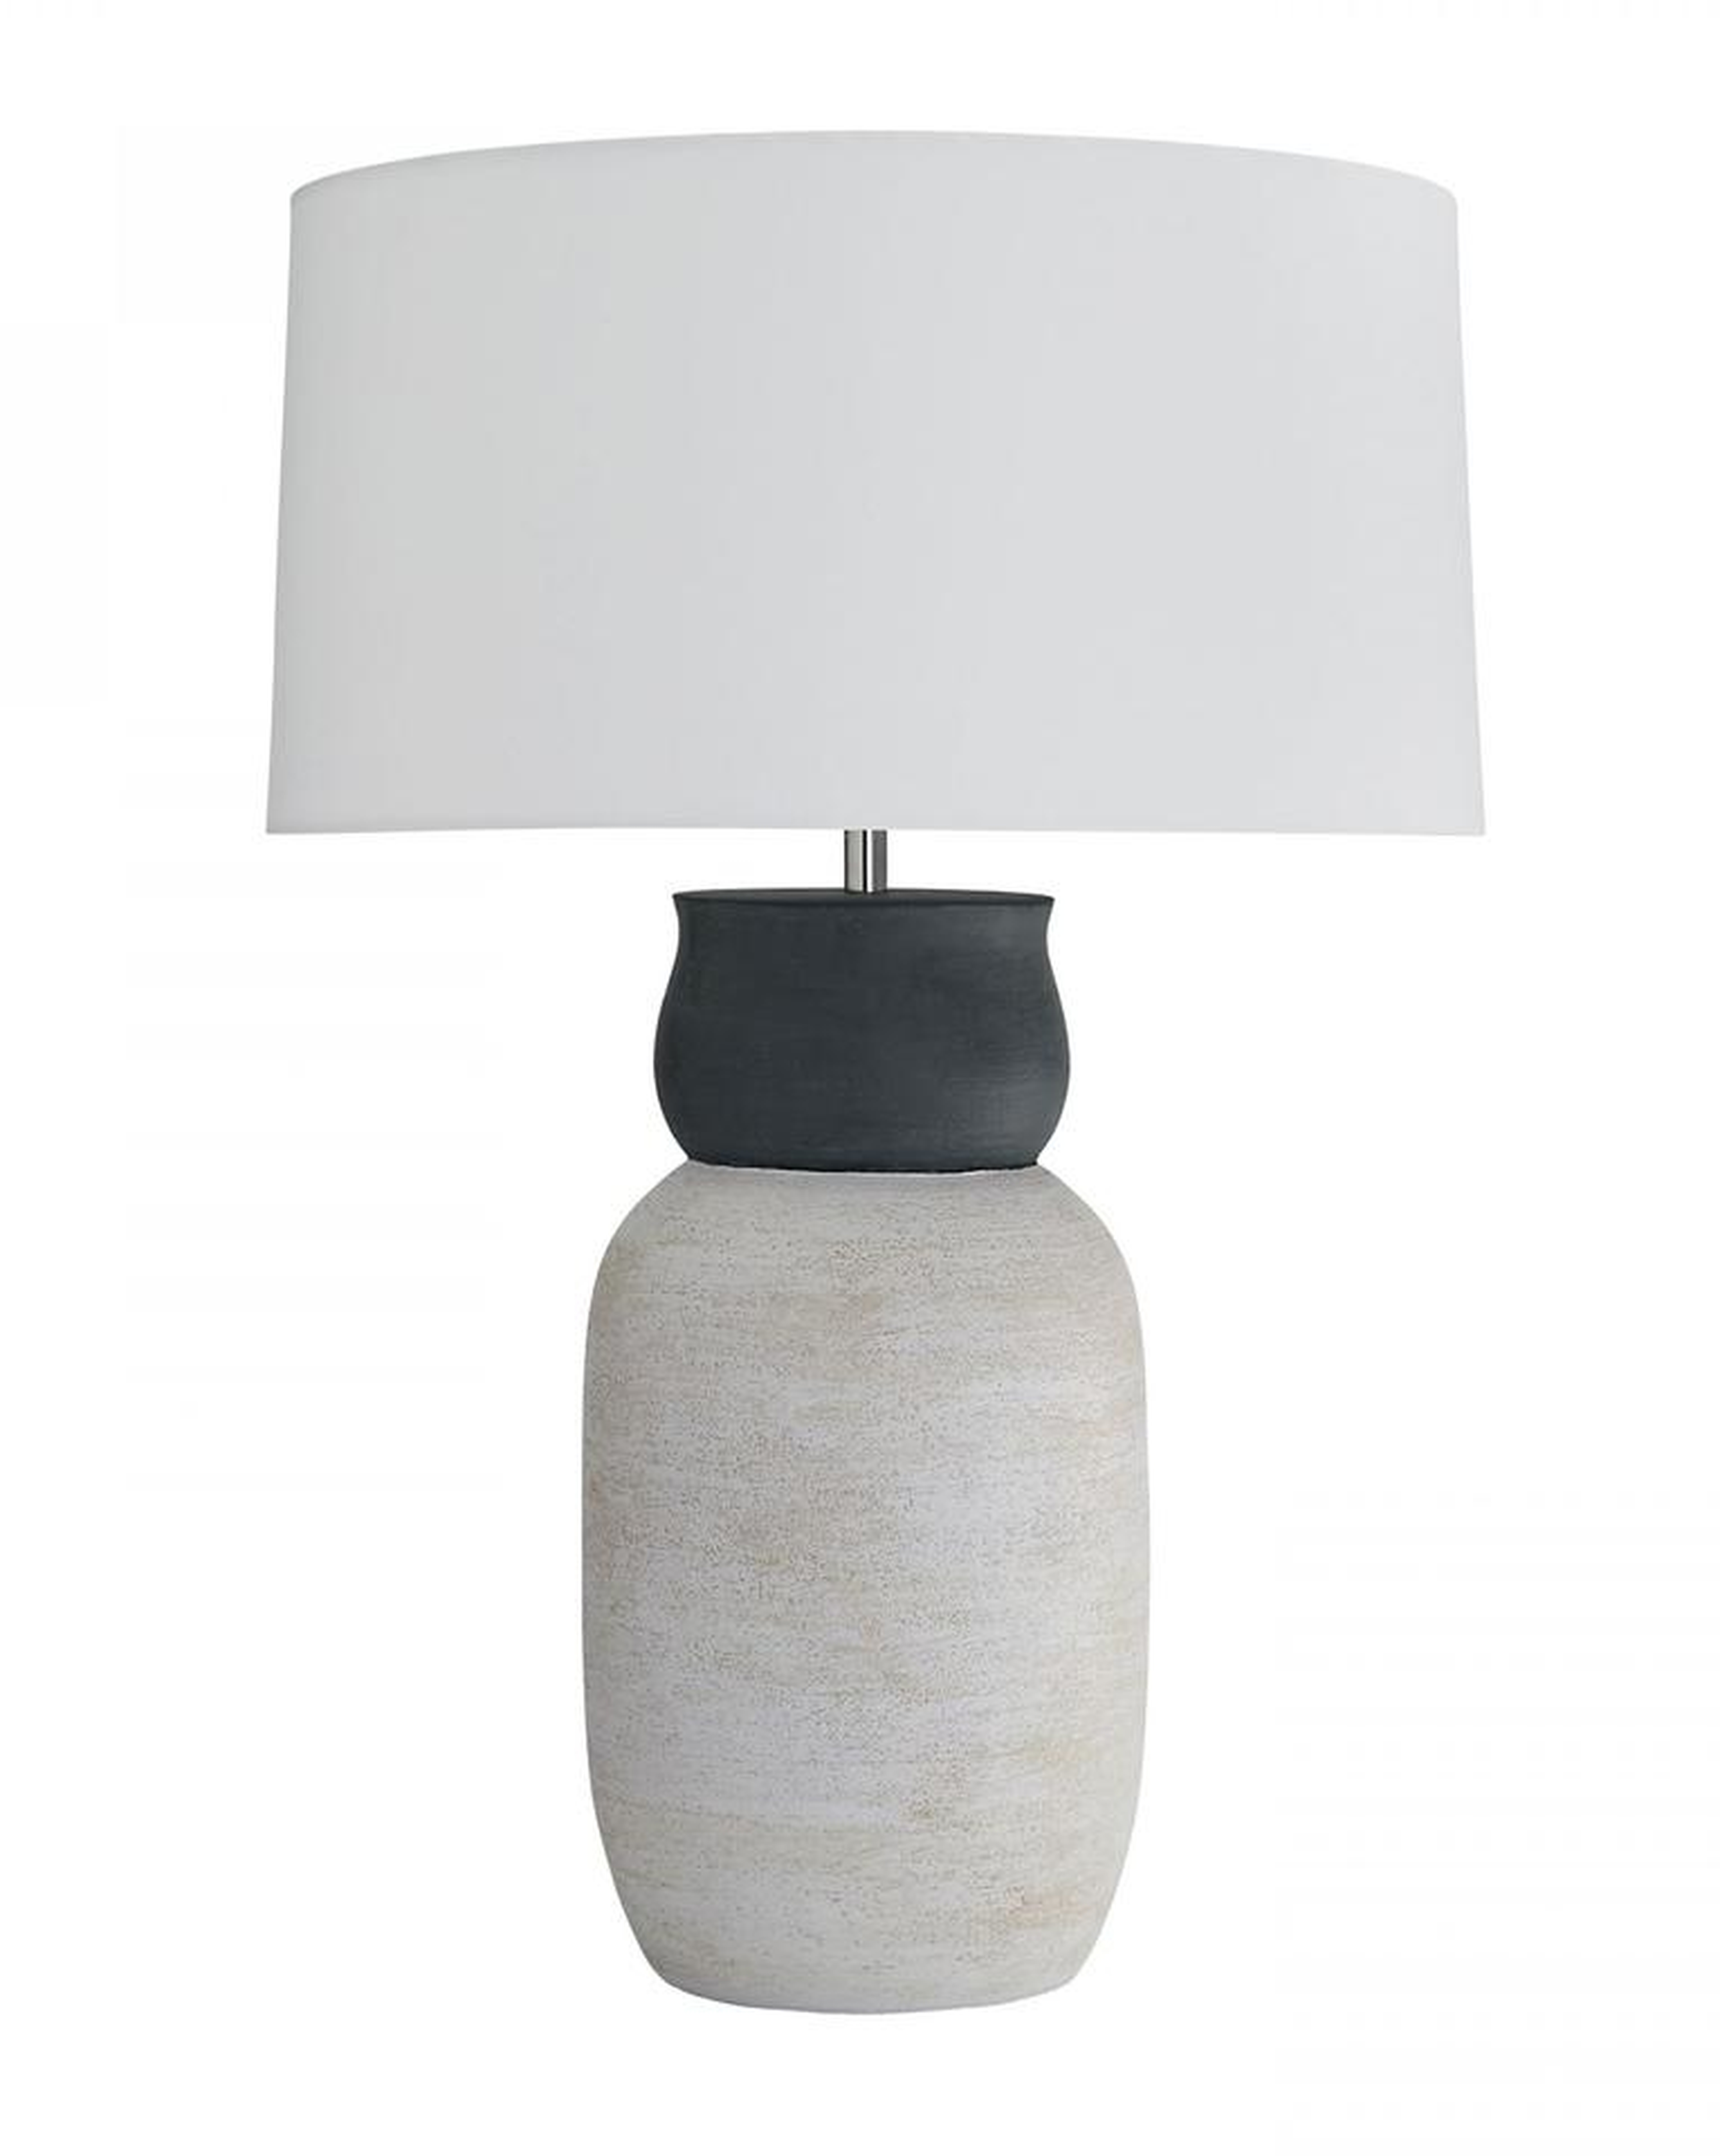 Ansley Table Lamp - McGee & Co.